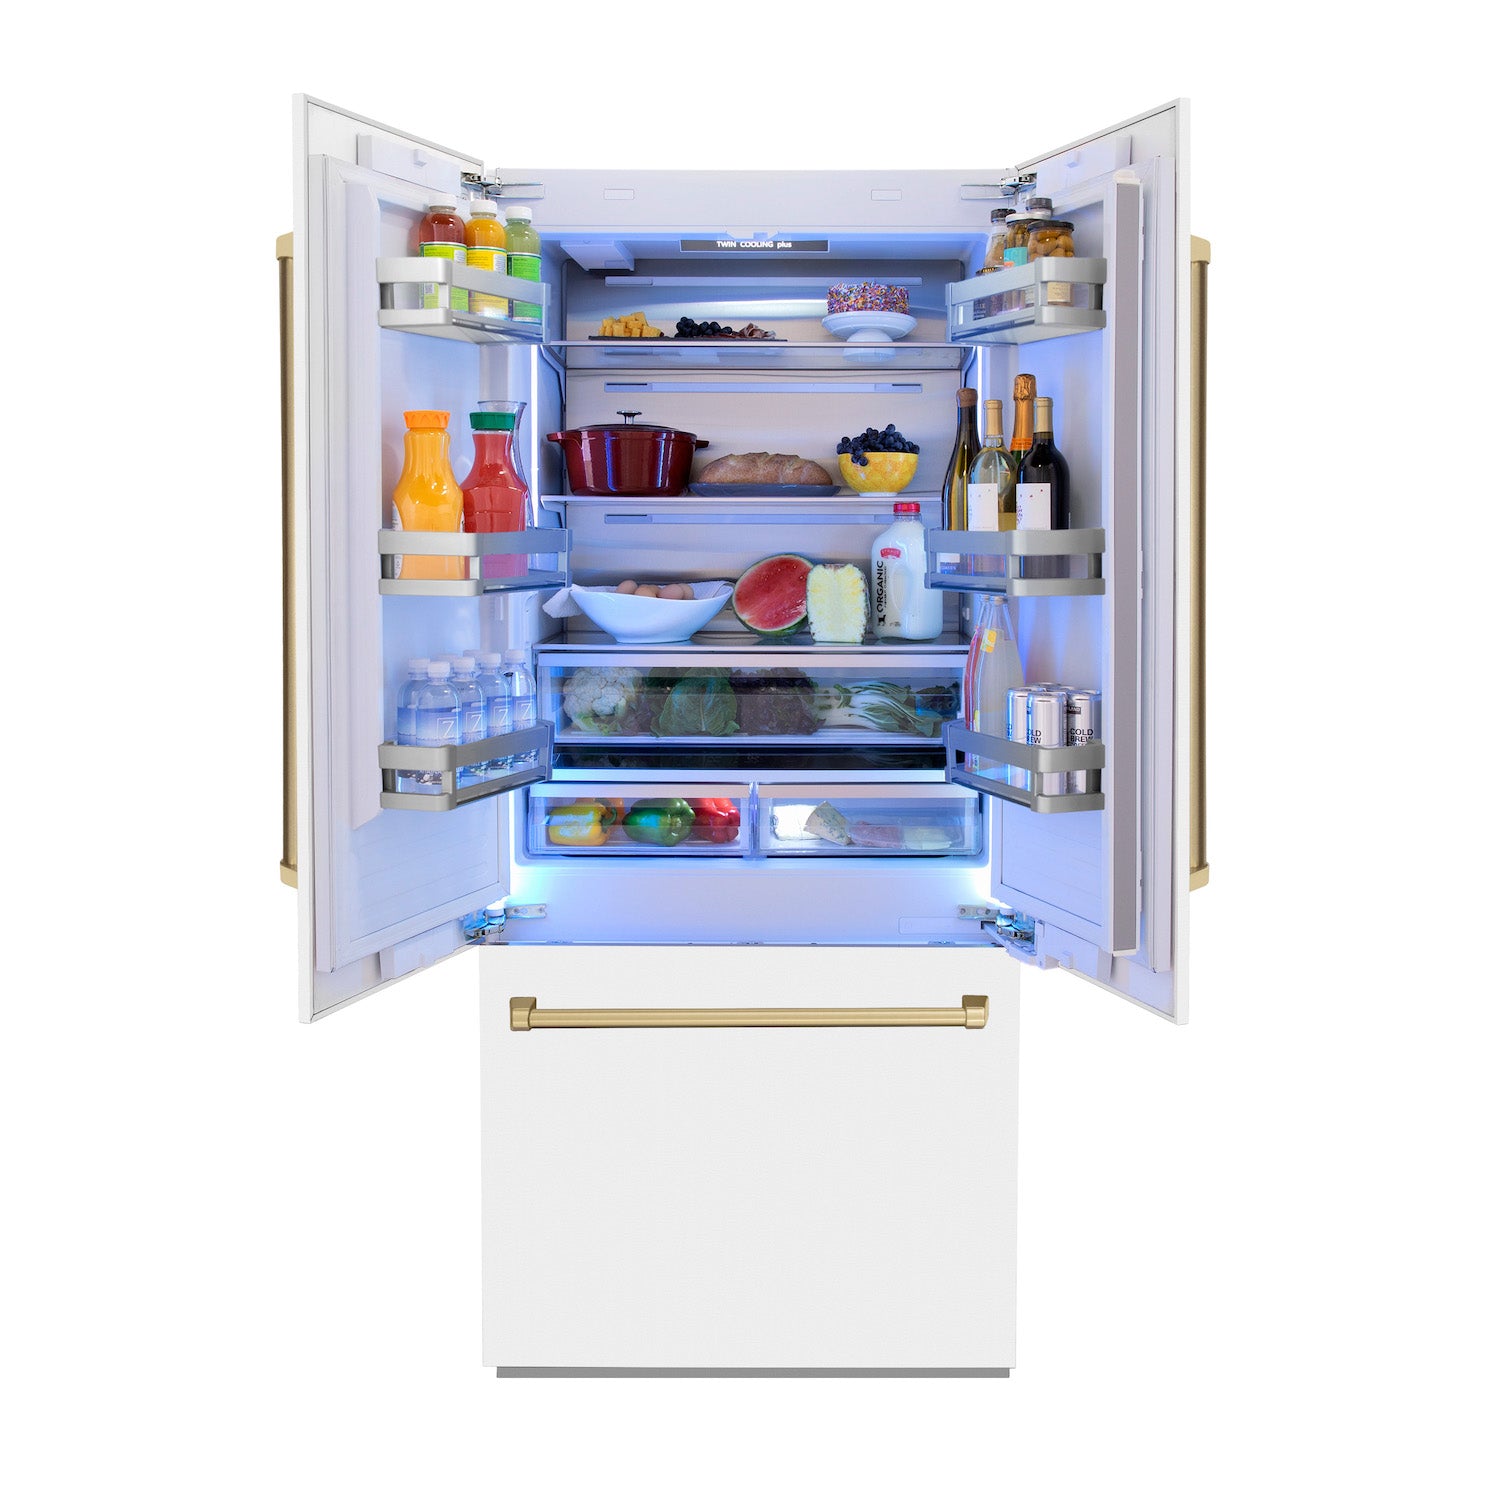 ZLINE Autograph Edition 36 in. Built-in Refrigerator in White Matte with Champagne Bronze Accents (RBIVZ-WM-36-CB) front with doors open, lights on, and food inside.